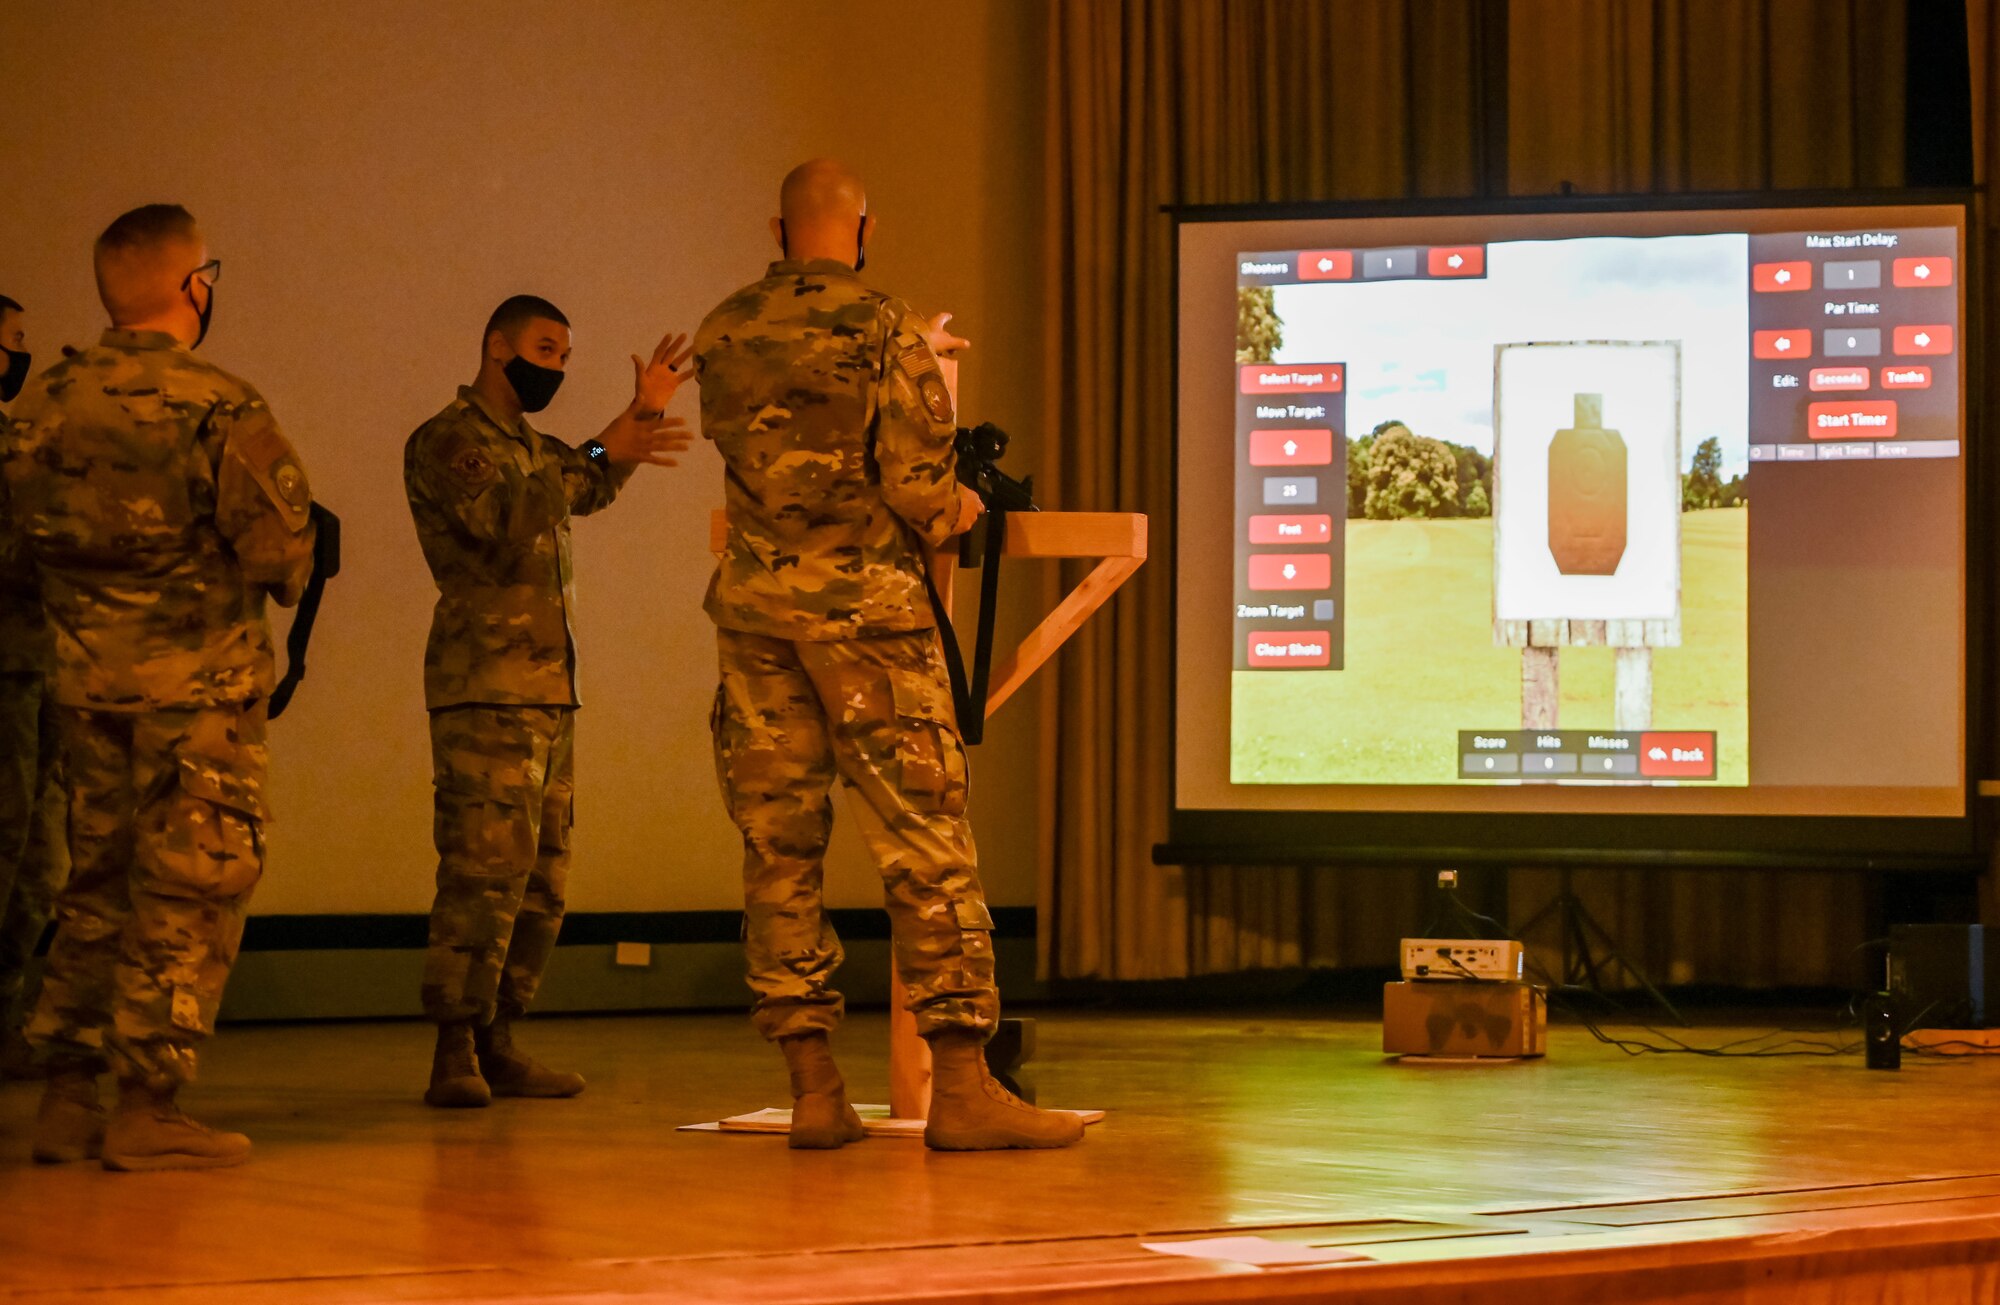 Technical Sgt. Israel Navarro (middle), 729th Air Control Squadron, demonstrates a laser-based, dry fire weapons training system Nov. 6, 2020, at Hill Air Force Base, Utah for Chief Master Sgt. Aron Garrard (right), 388th Maintenance Squadron, Nov. 6, 2020 at Hill Air Force Base, Utah. Airmen in 729th ACS are using the system for training to help them weapons qualify before deployments.  (U.S. Air Force photo by Cynthia Griggs)